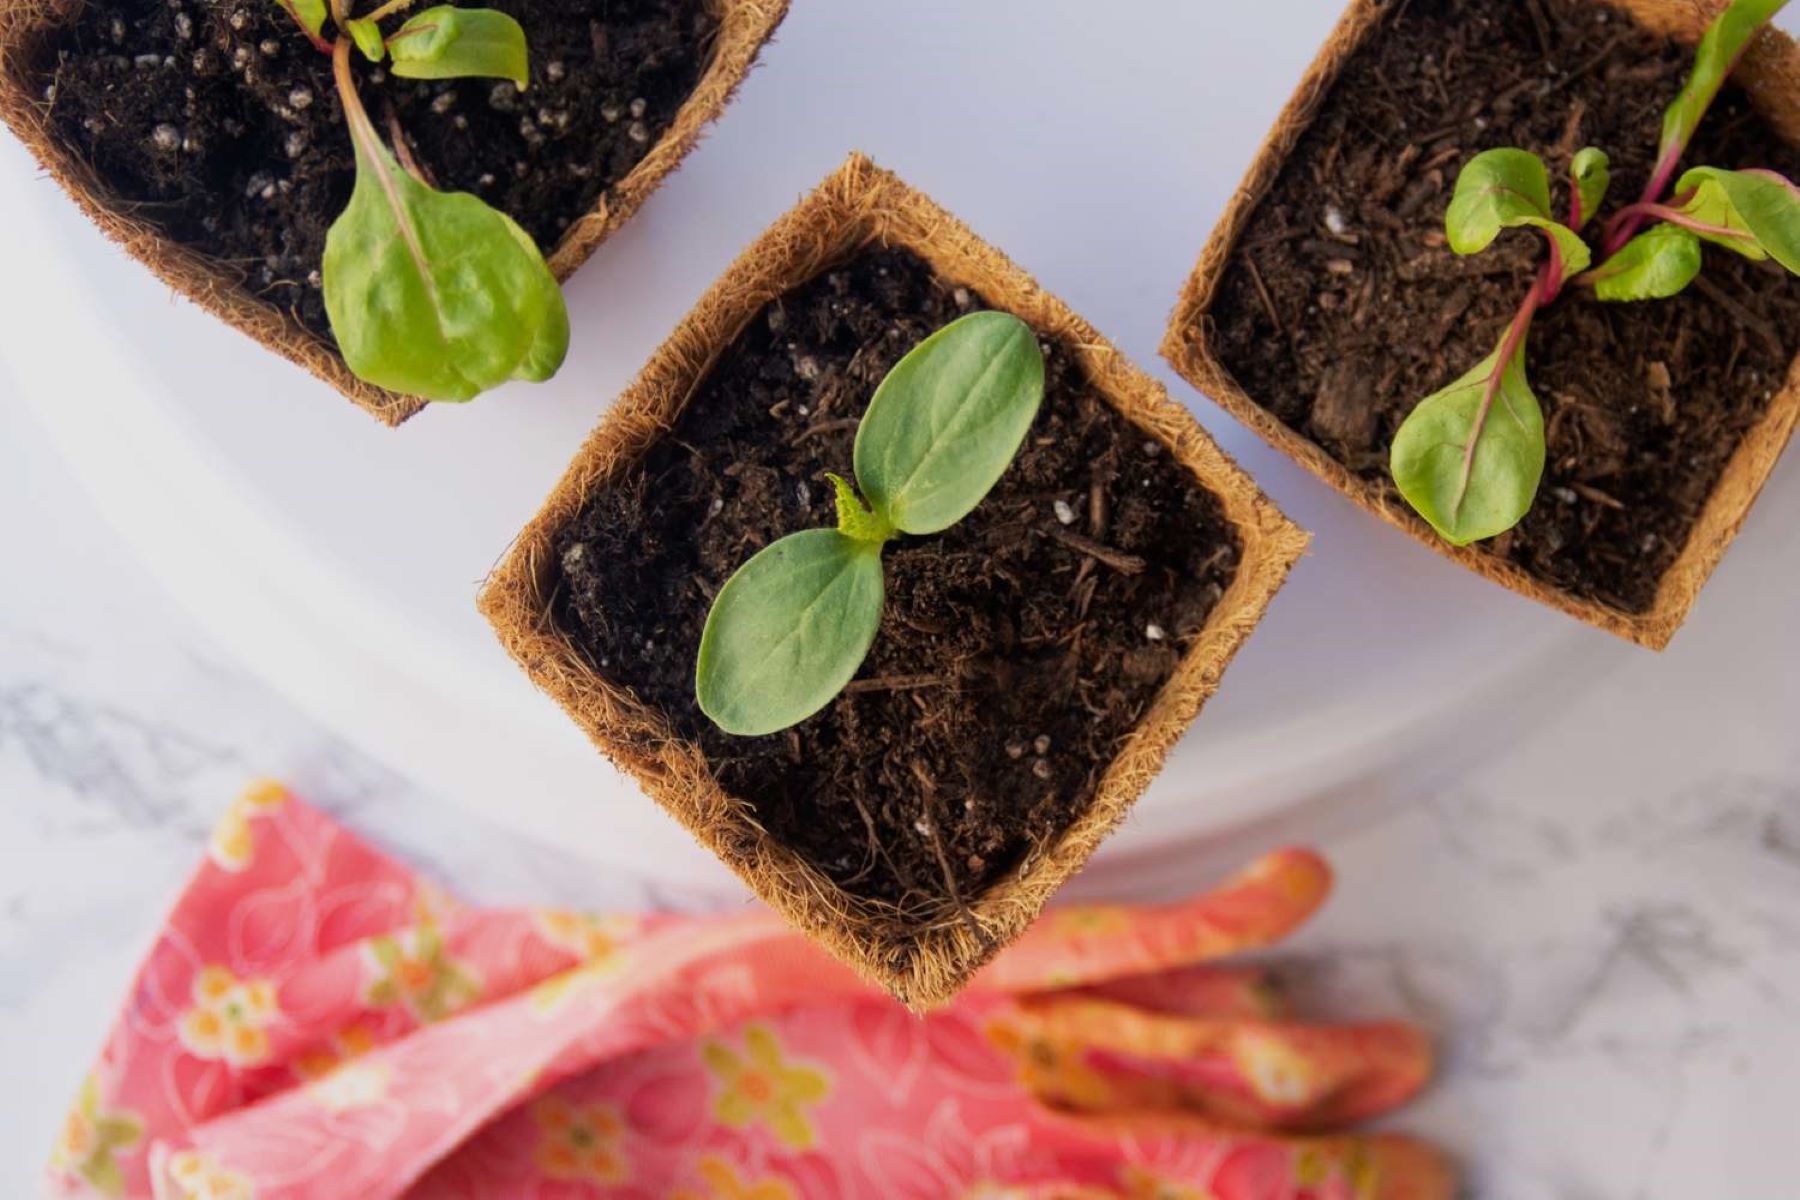 How To Grow Plants From Seeds Indoors